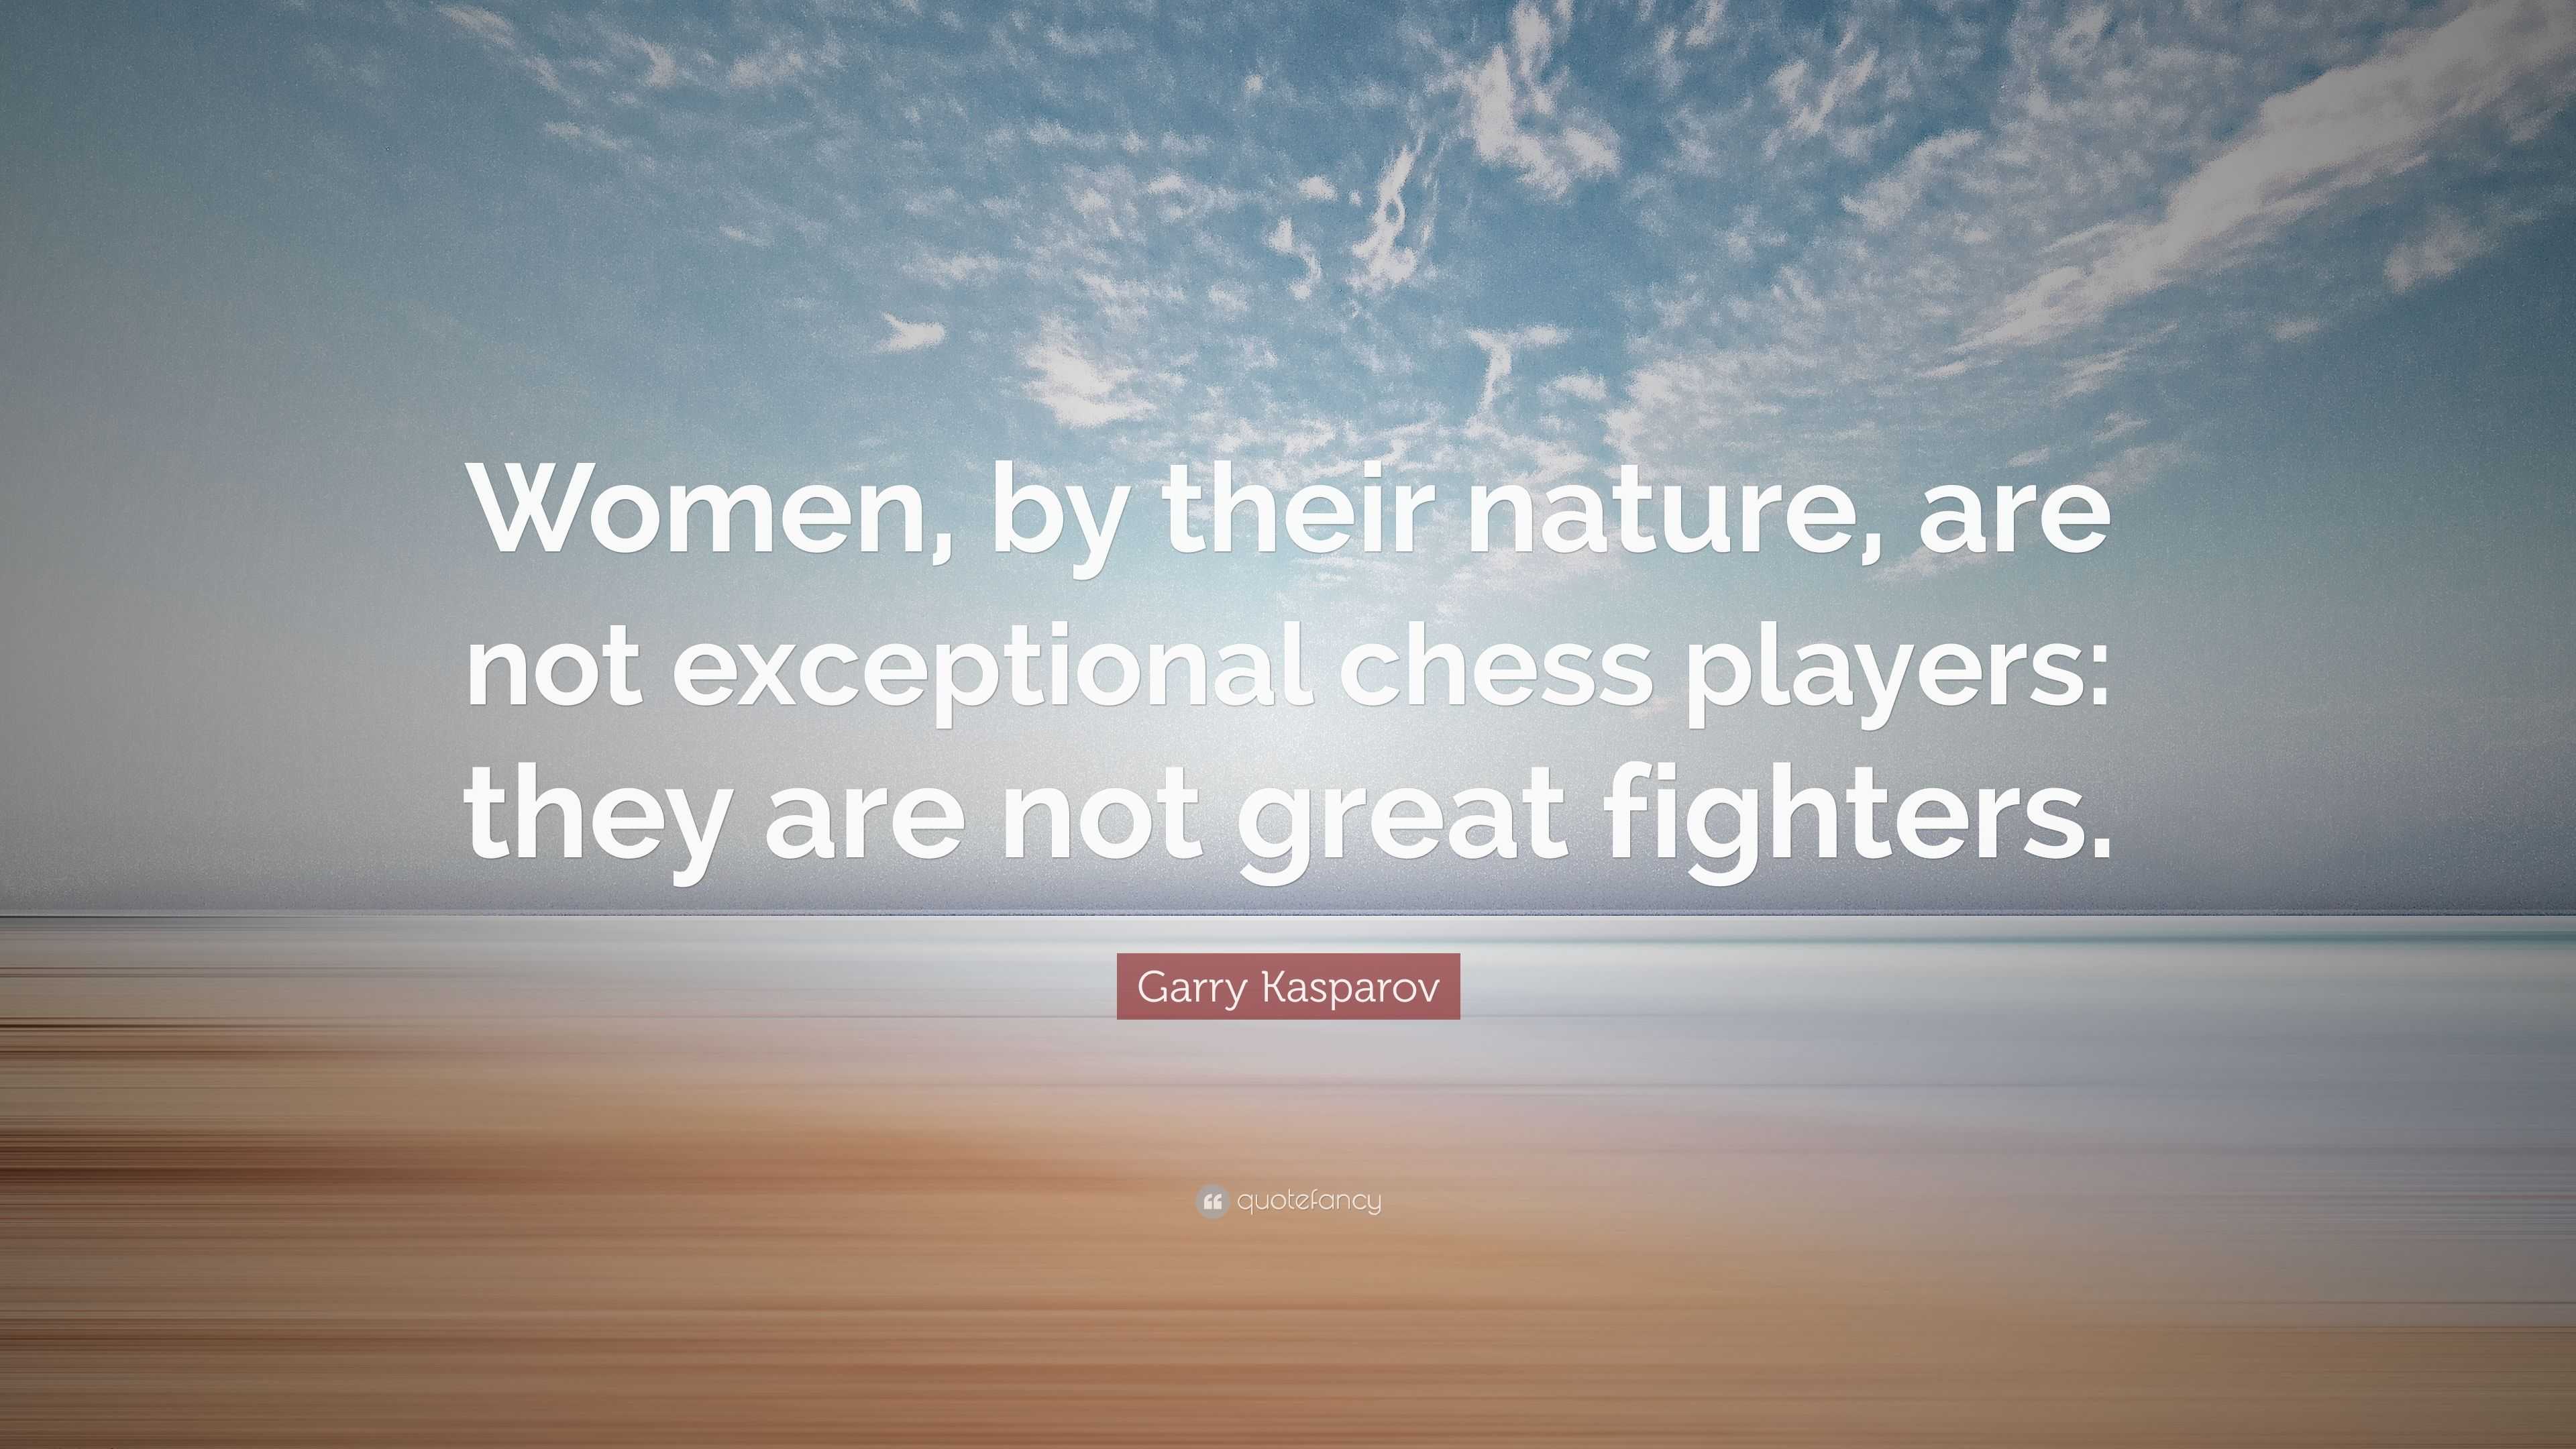 65 Garry Kasparov Quotes On Success In Life – OverallMotivation